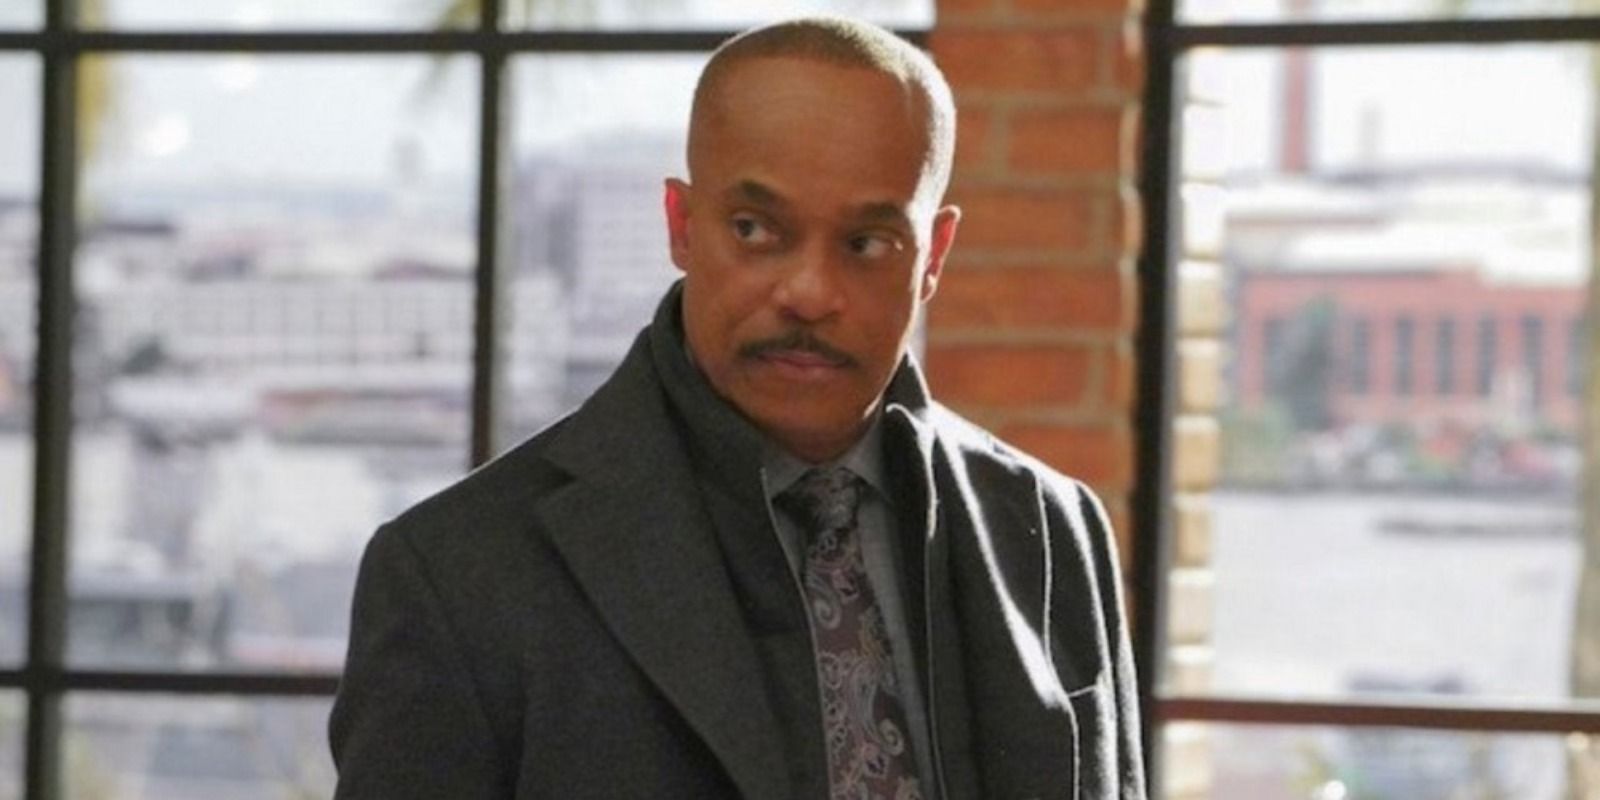 Leon Vance in NCIS, aspect ration 1600 by 800